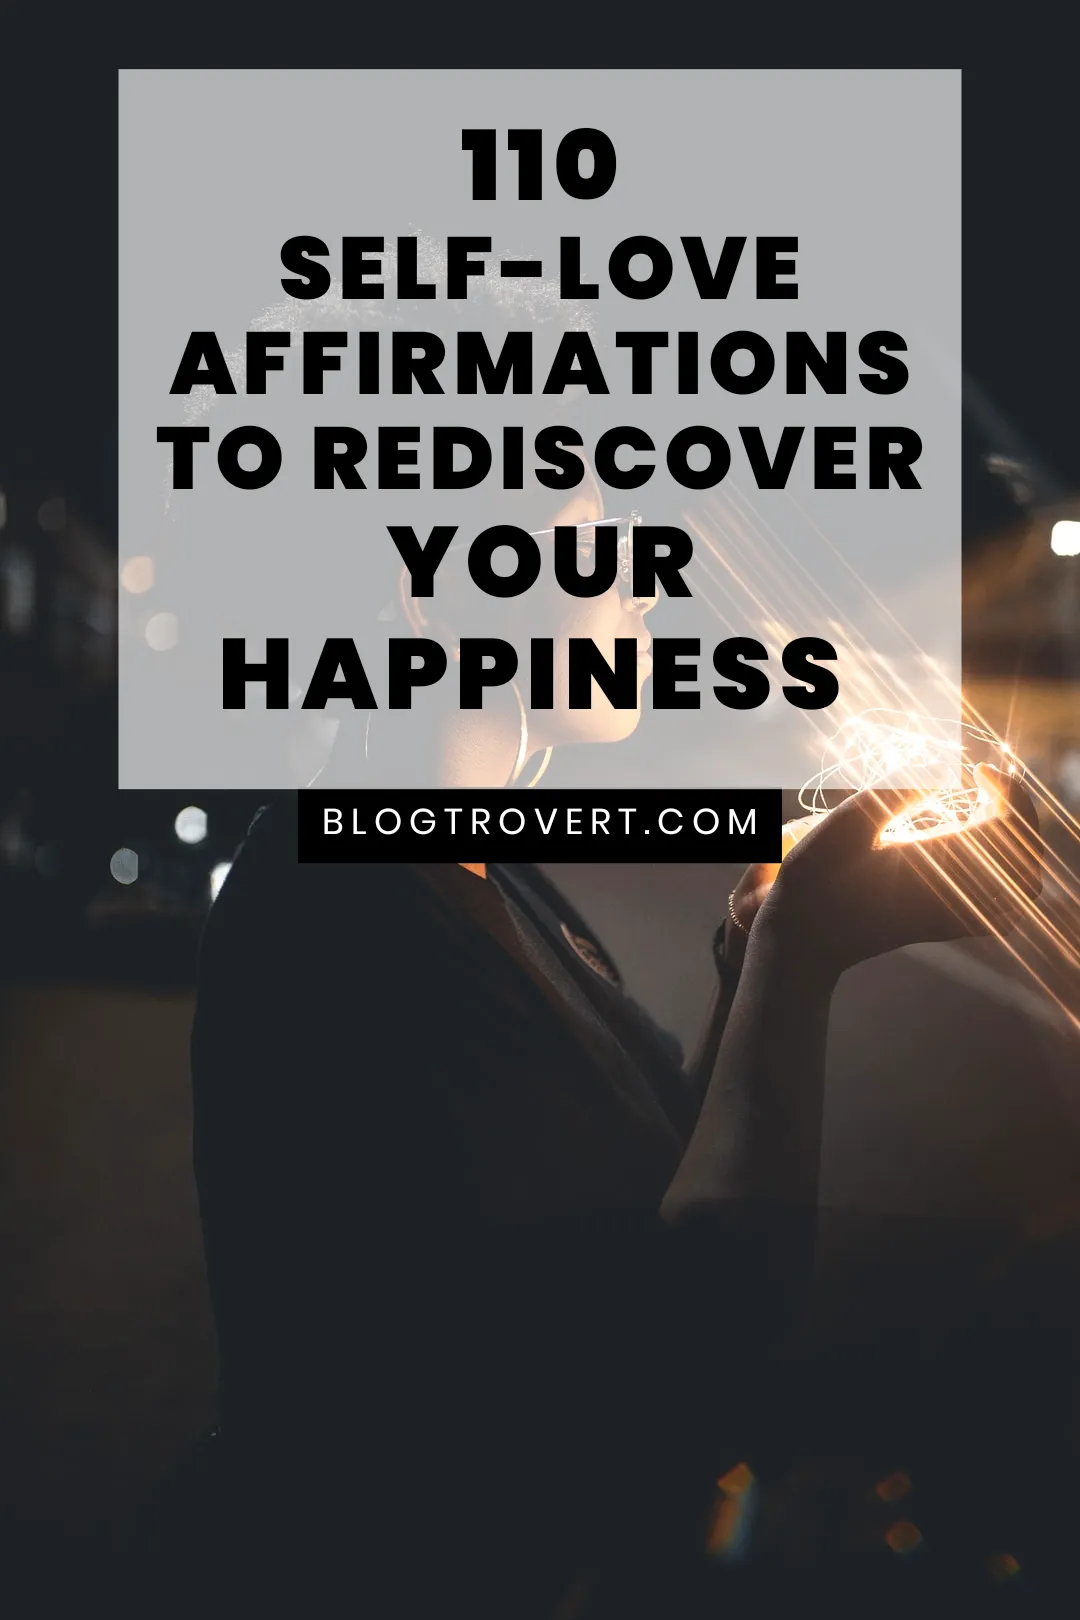 110 Positive Affirmations For Self-love 2